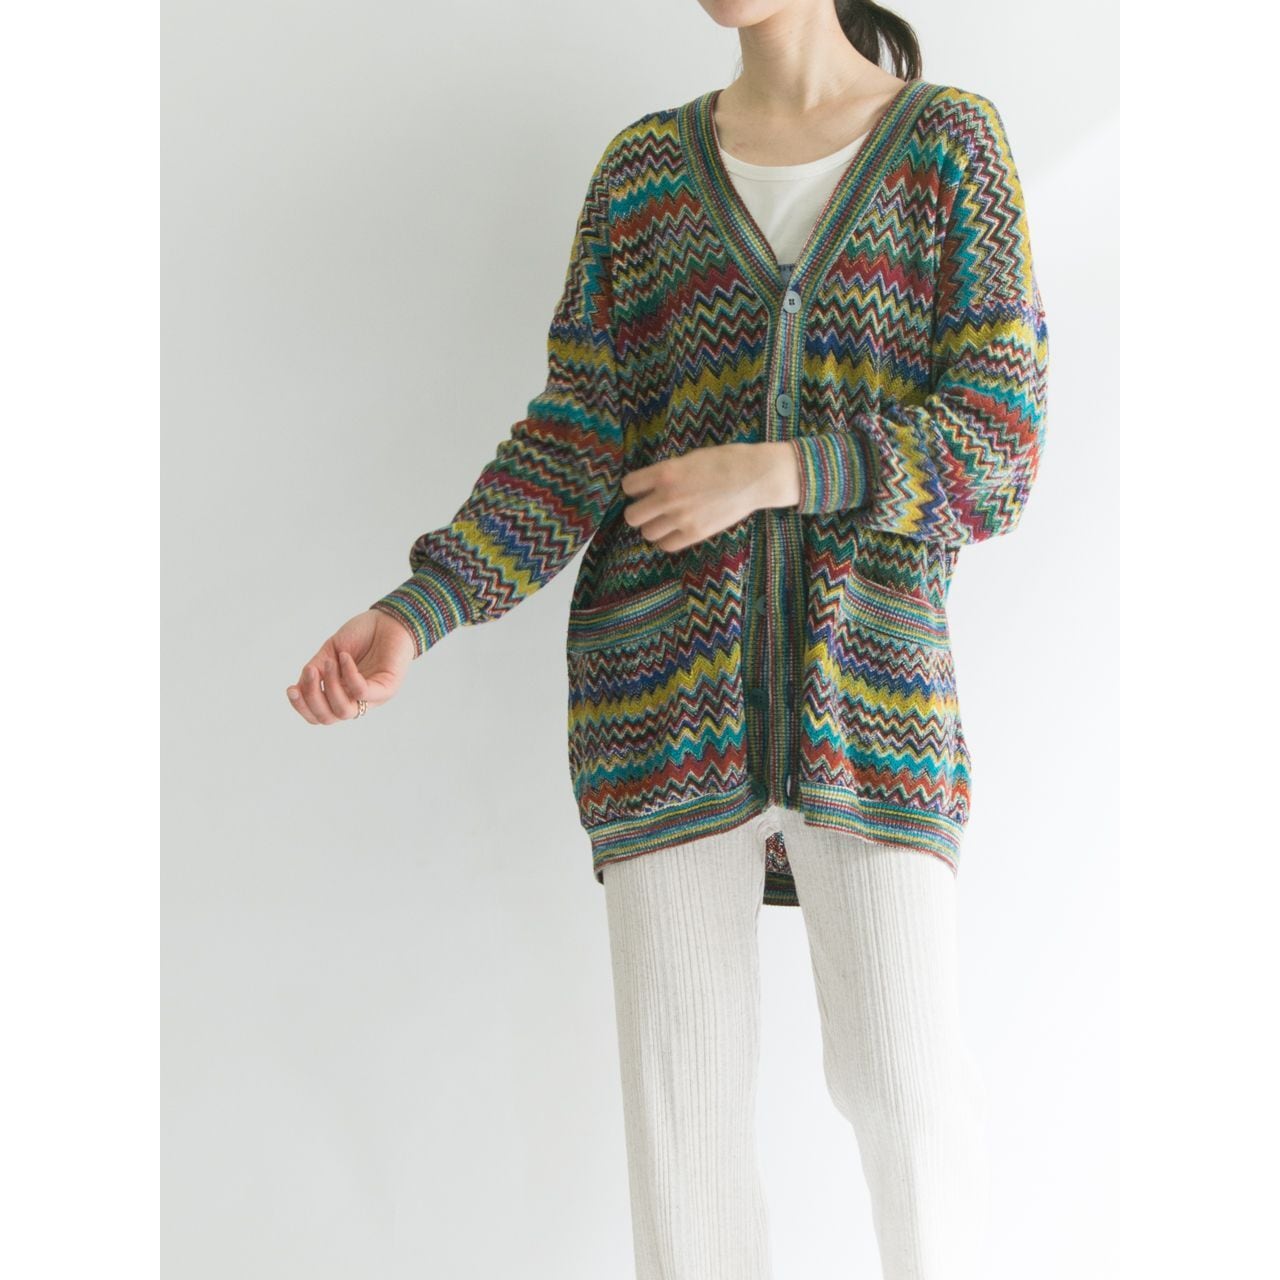 MISSONI】Made in Italy ziigzag knit cardigan（ミッソーニ ...